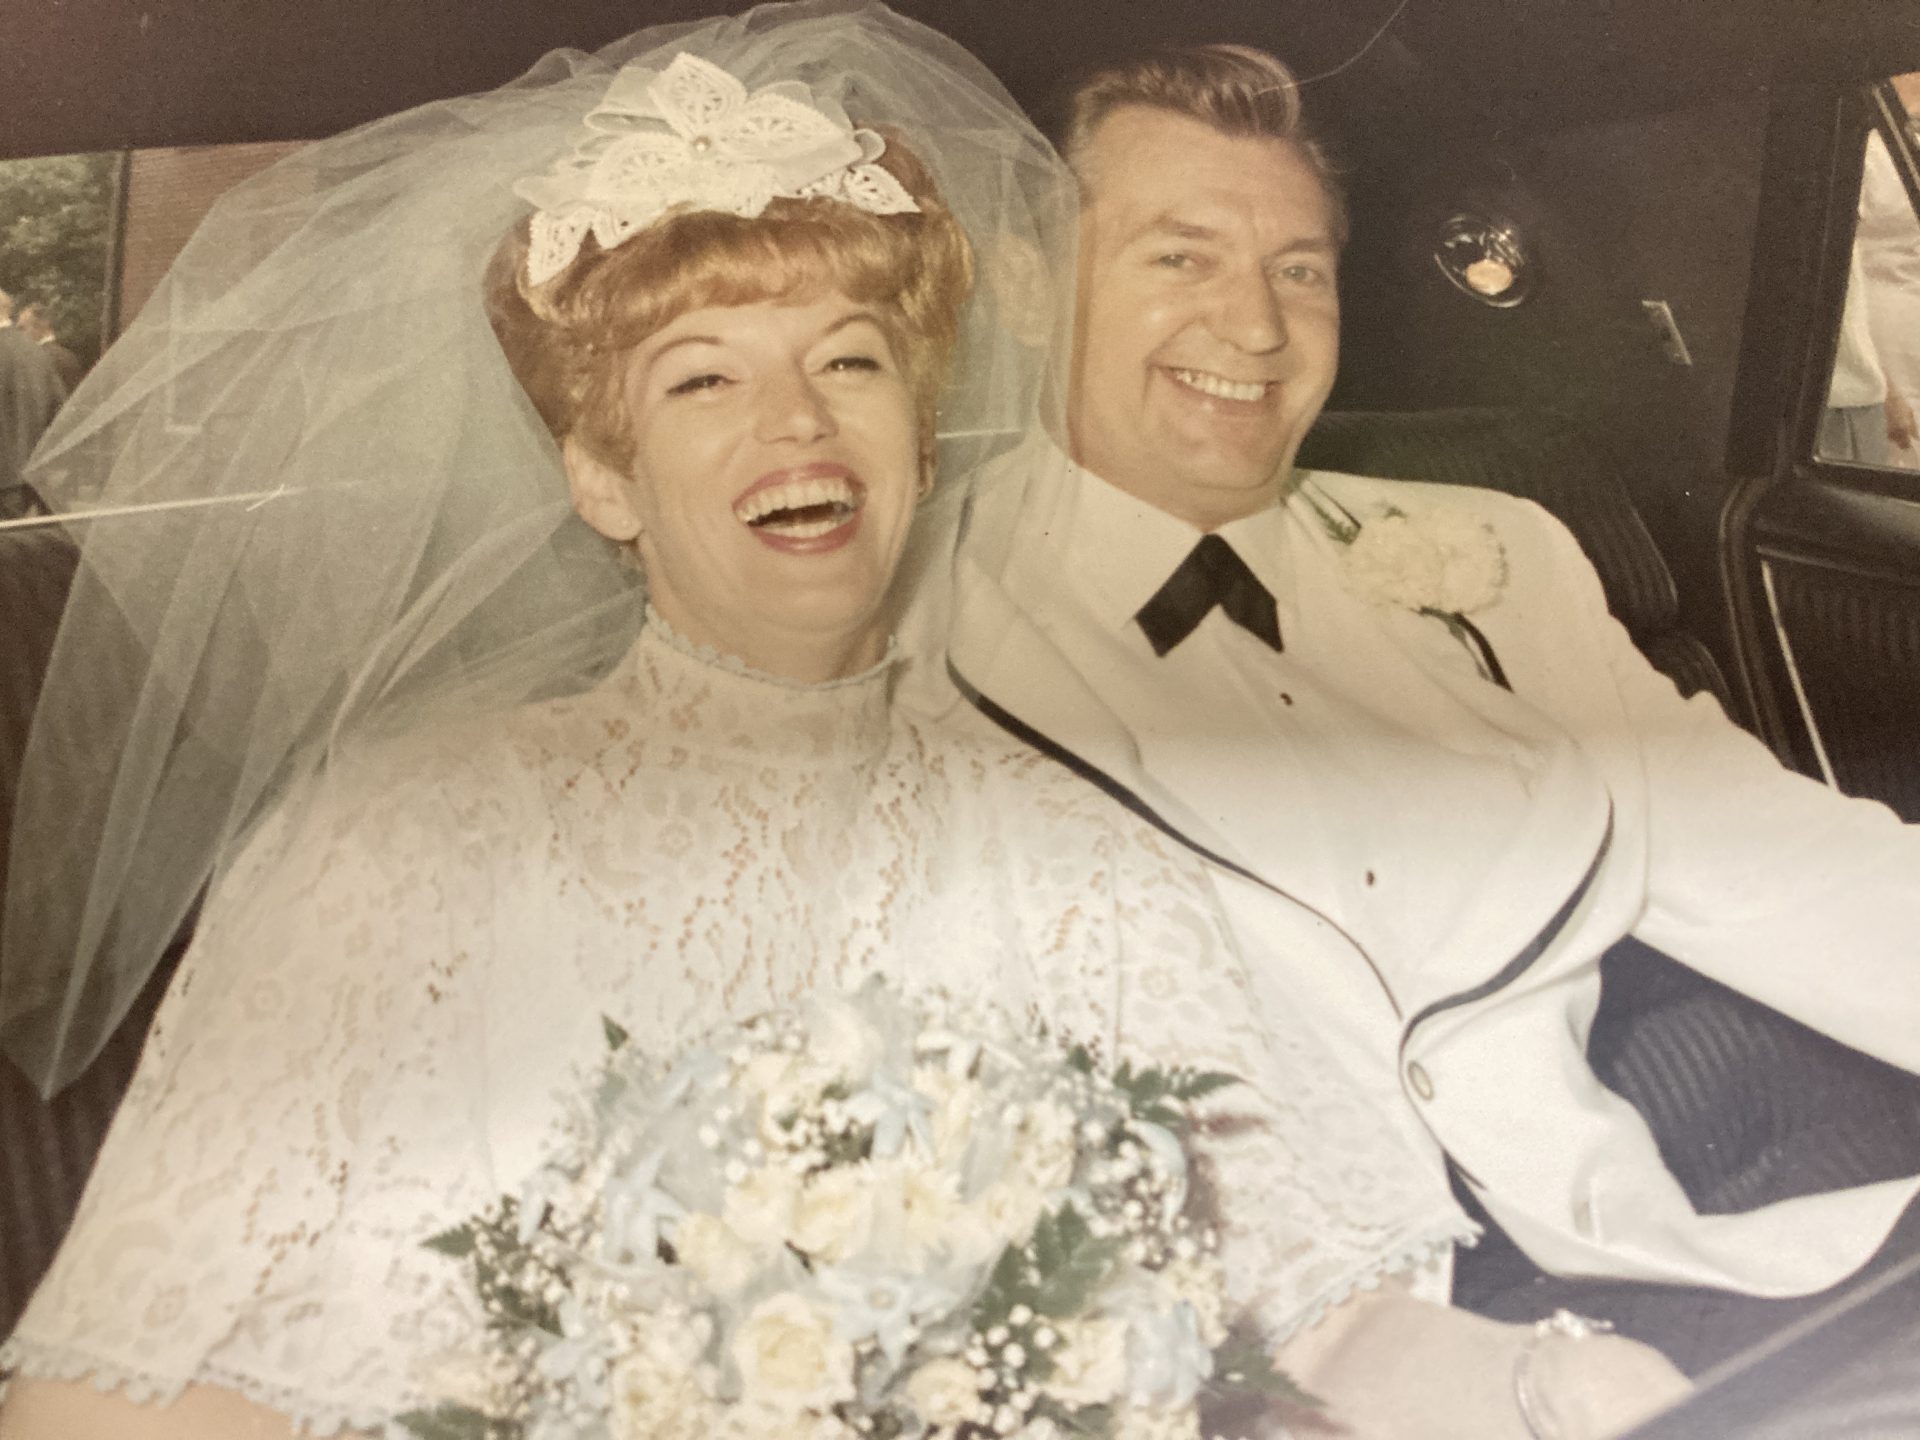 Joan and Pat’s wedding day 6/27/1970